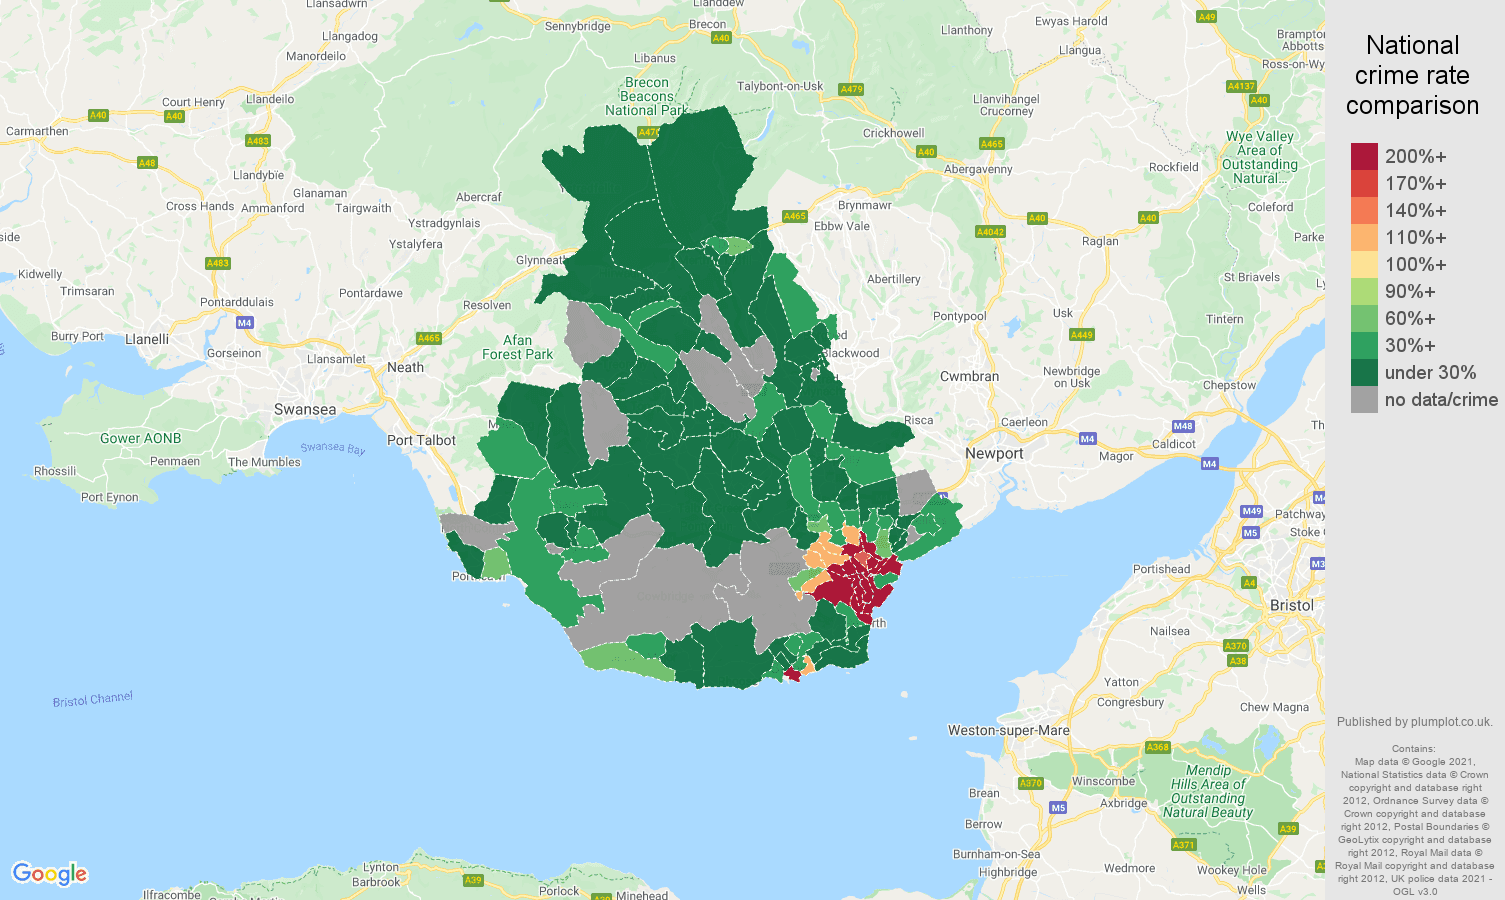 Cardiff bicycle theft crime rate comparison map